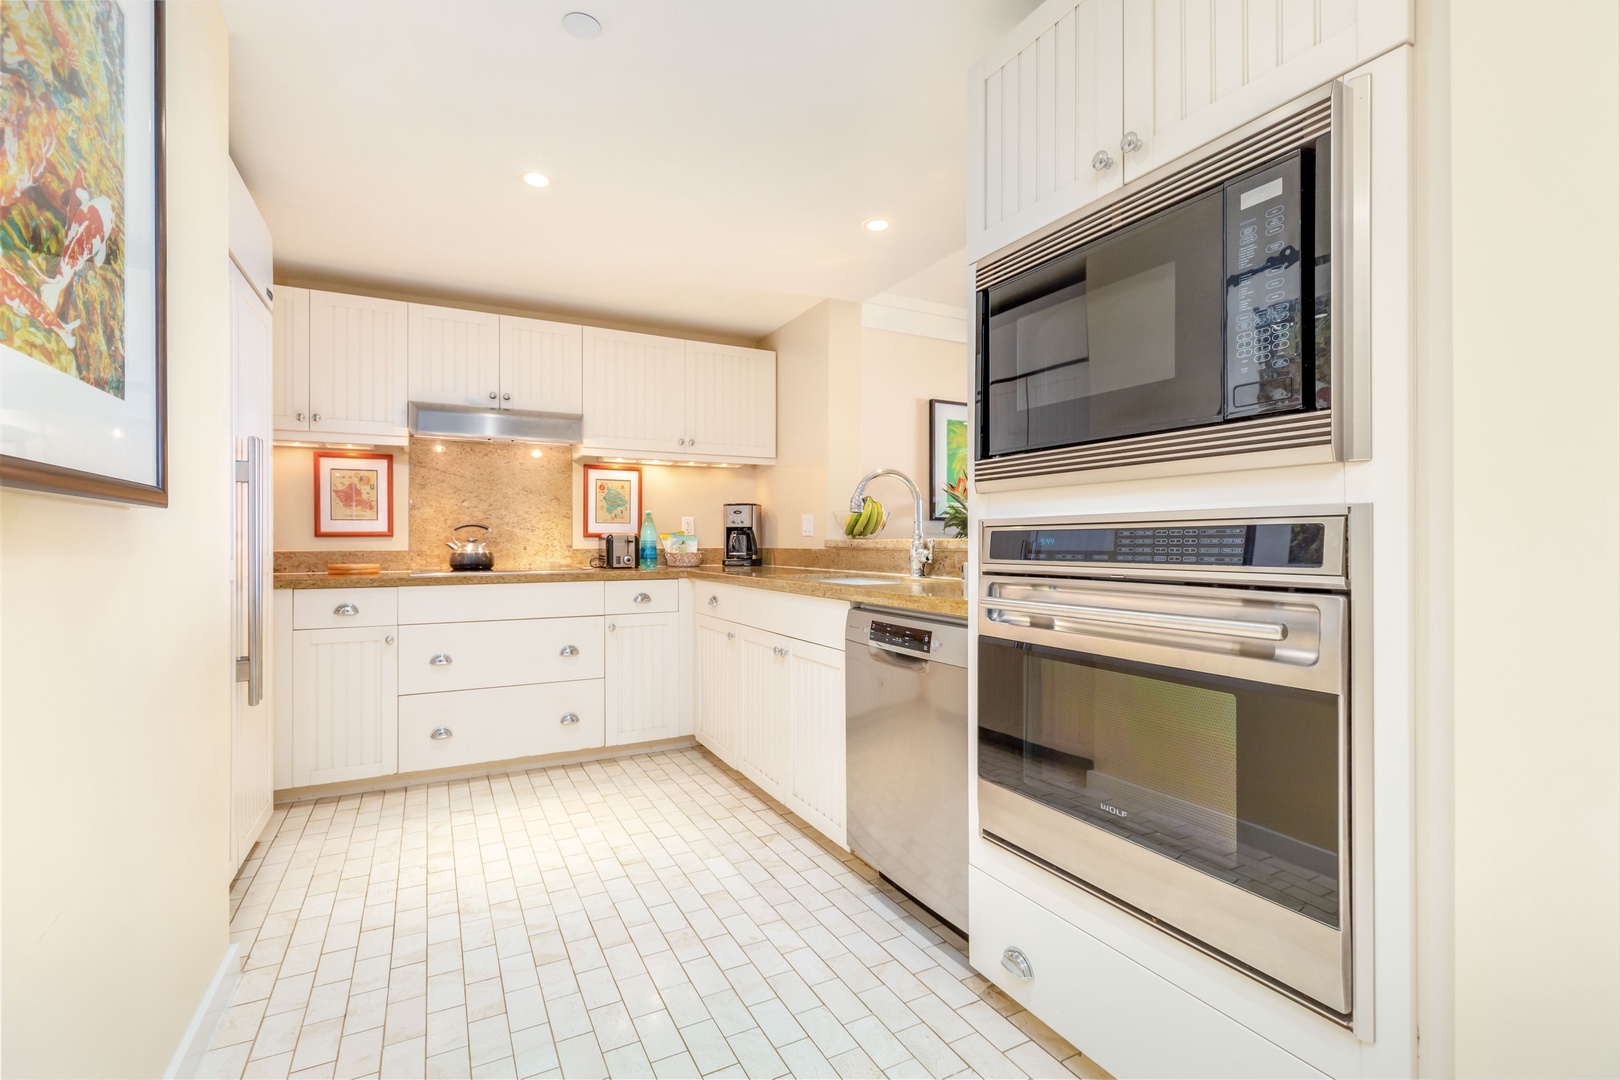 Kahuku Vacation Rentals, Turtle Bay Villas 210 - well-appointed kitchen with brand new appliances, perfect for crafting your favorite meals.